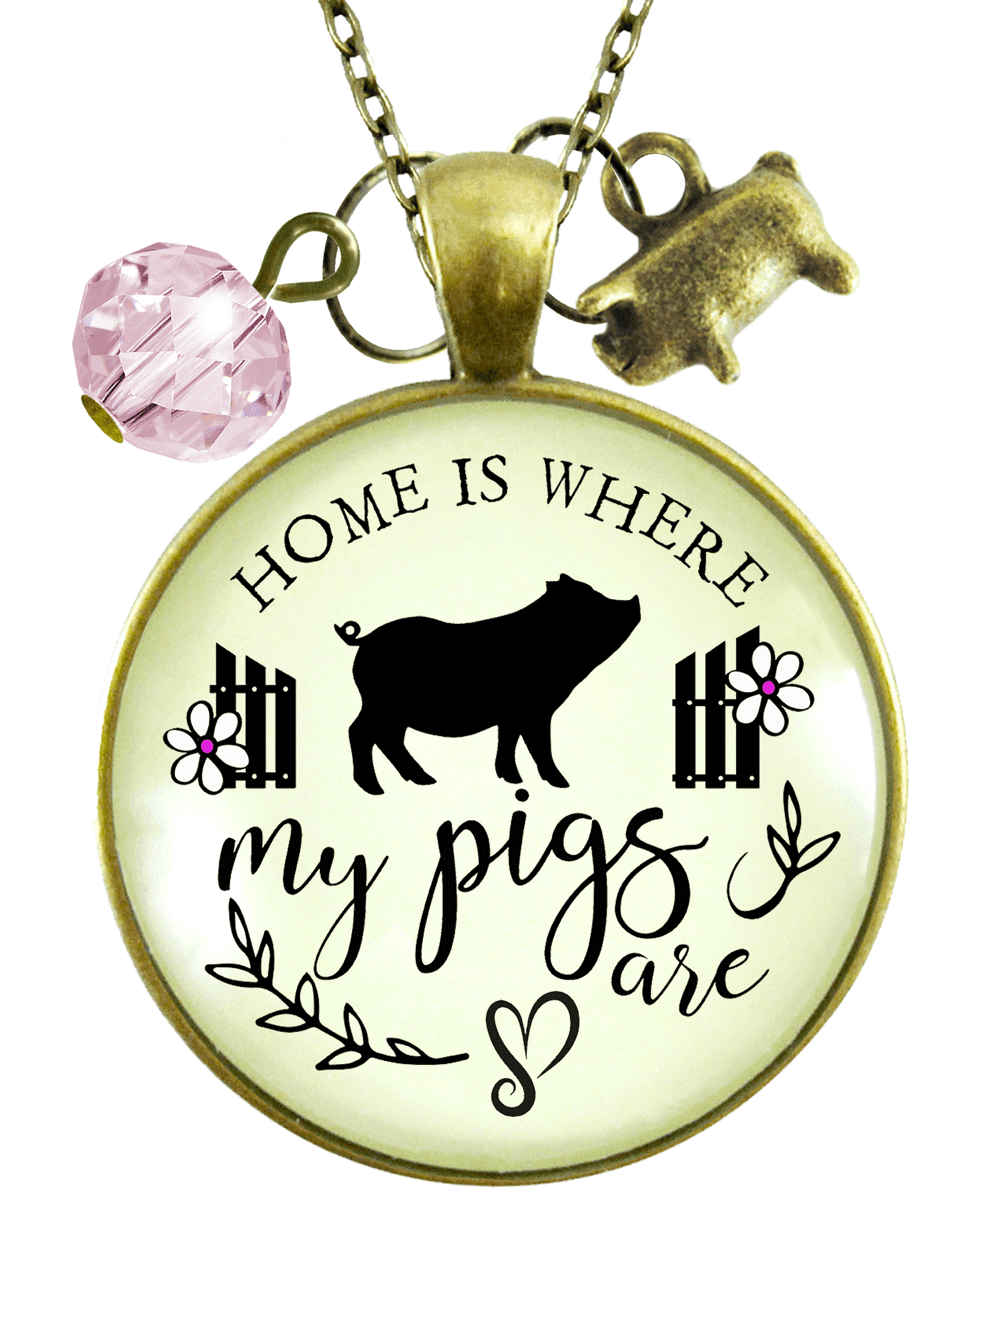 HandcraftDecorations Pig Necklace Pendant Pig,Personalized Pet Pig Jewelry,Farm Animal,Animal Lover Gift Pig Charm Farm Gift.F177